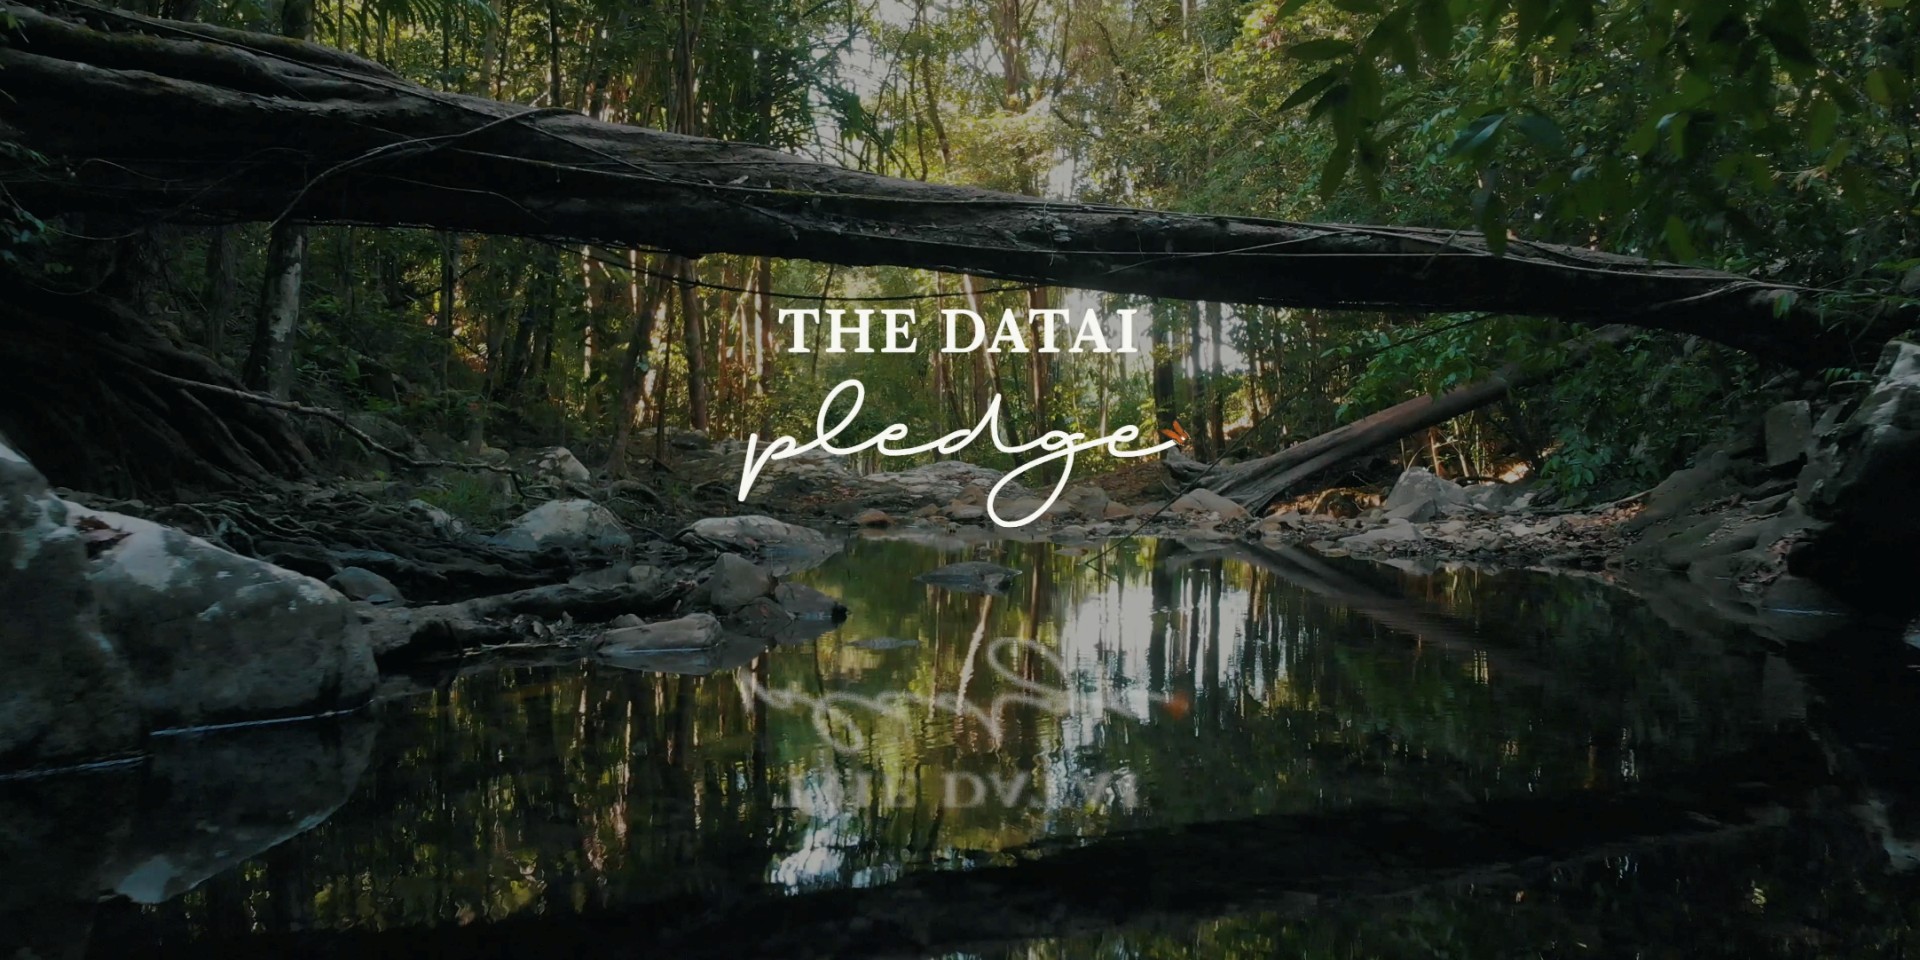 The Datai Pledge Overview